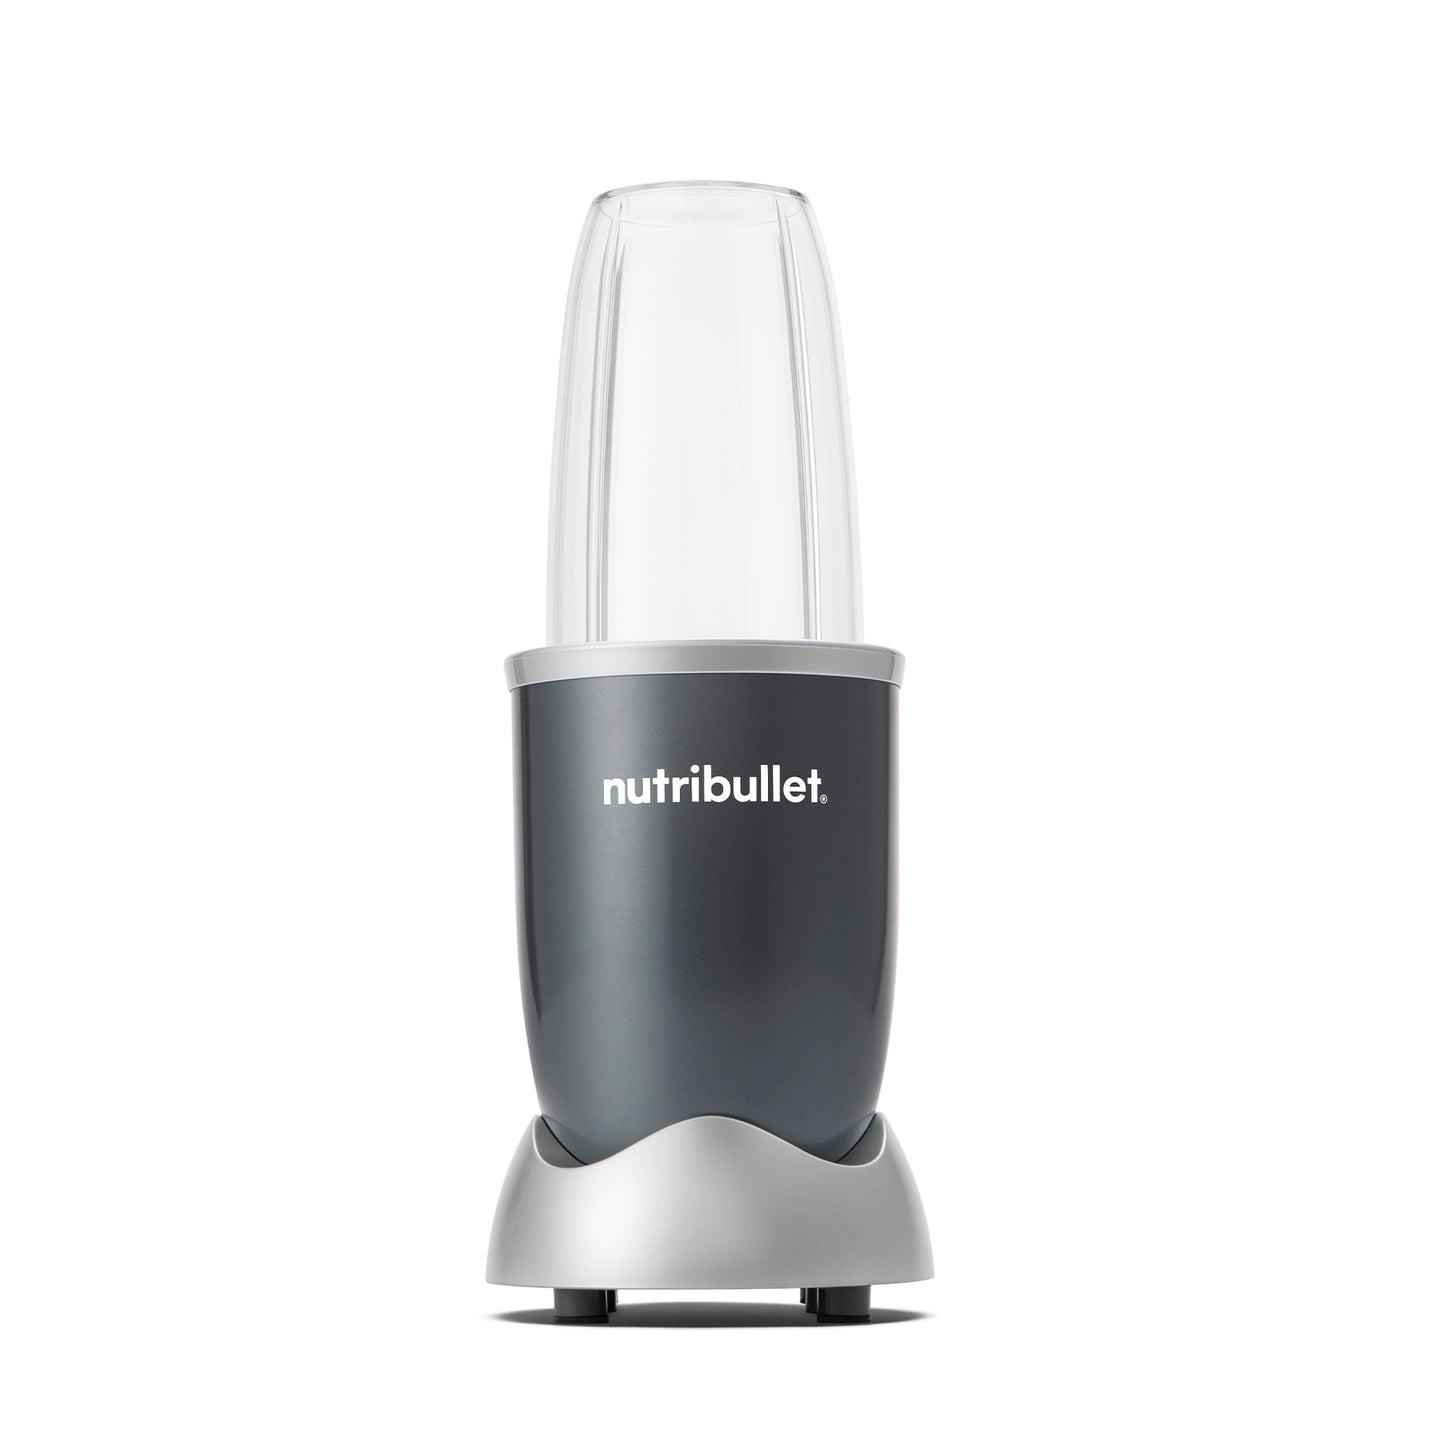 Blend Your Way to Health: Discover the NutriBullet 600 Watt Personal Blender